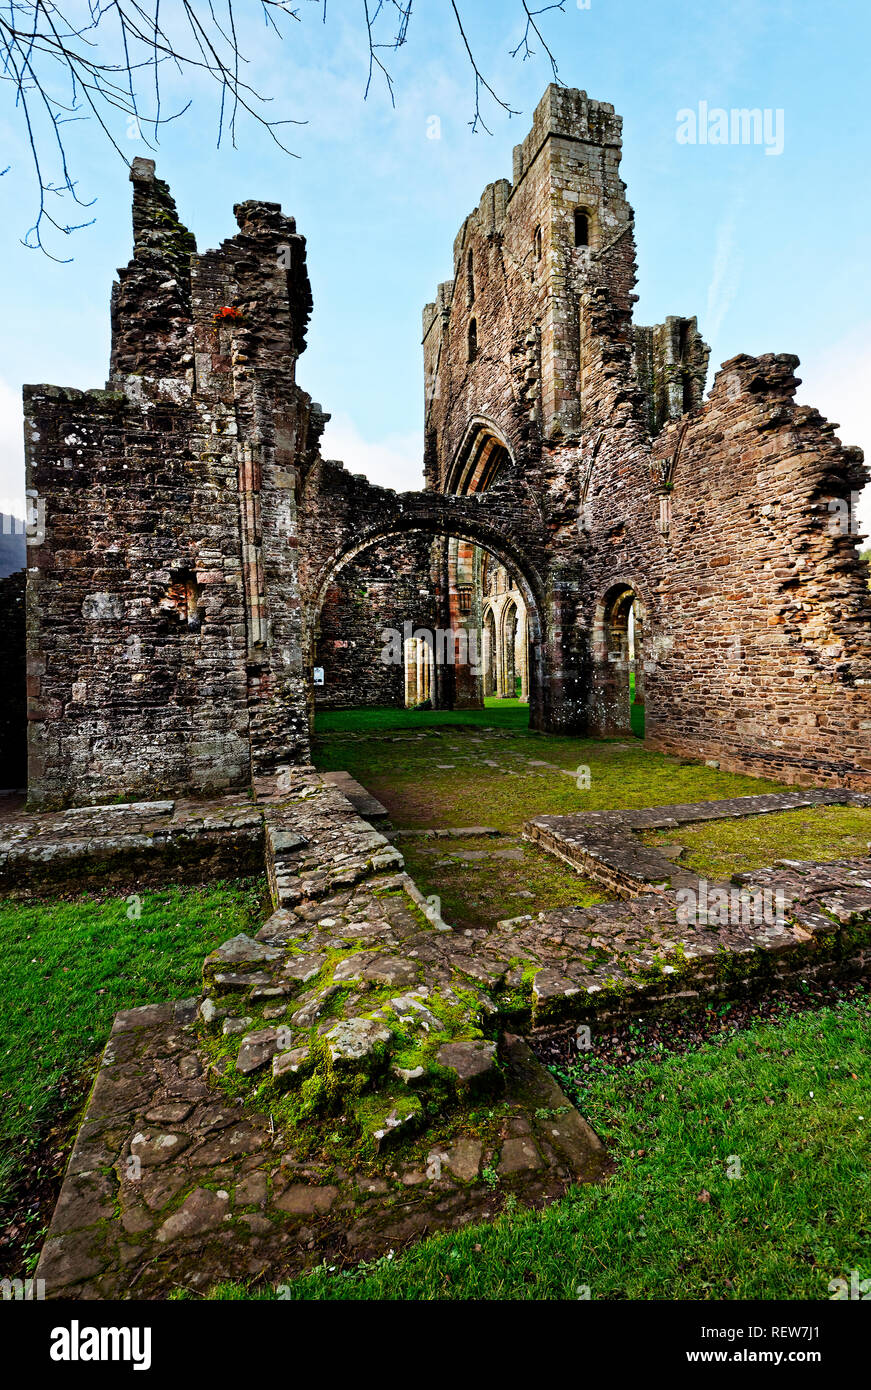 Llanthony Priory (Priordy Llanddewi Nant Hodni), ruins of a former Augustinian priory in the secluded Vale of Ewyas, a steep-sided once-glaciated vale Stock Photo